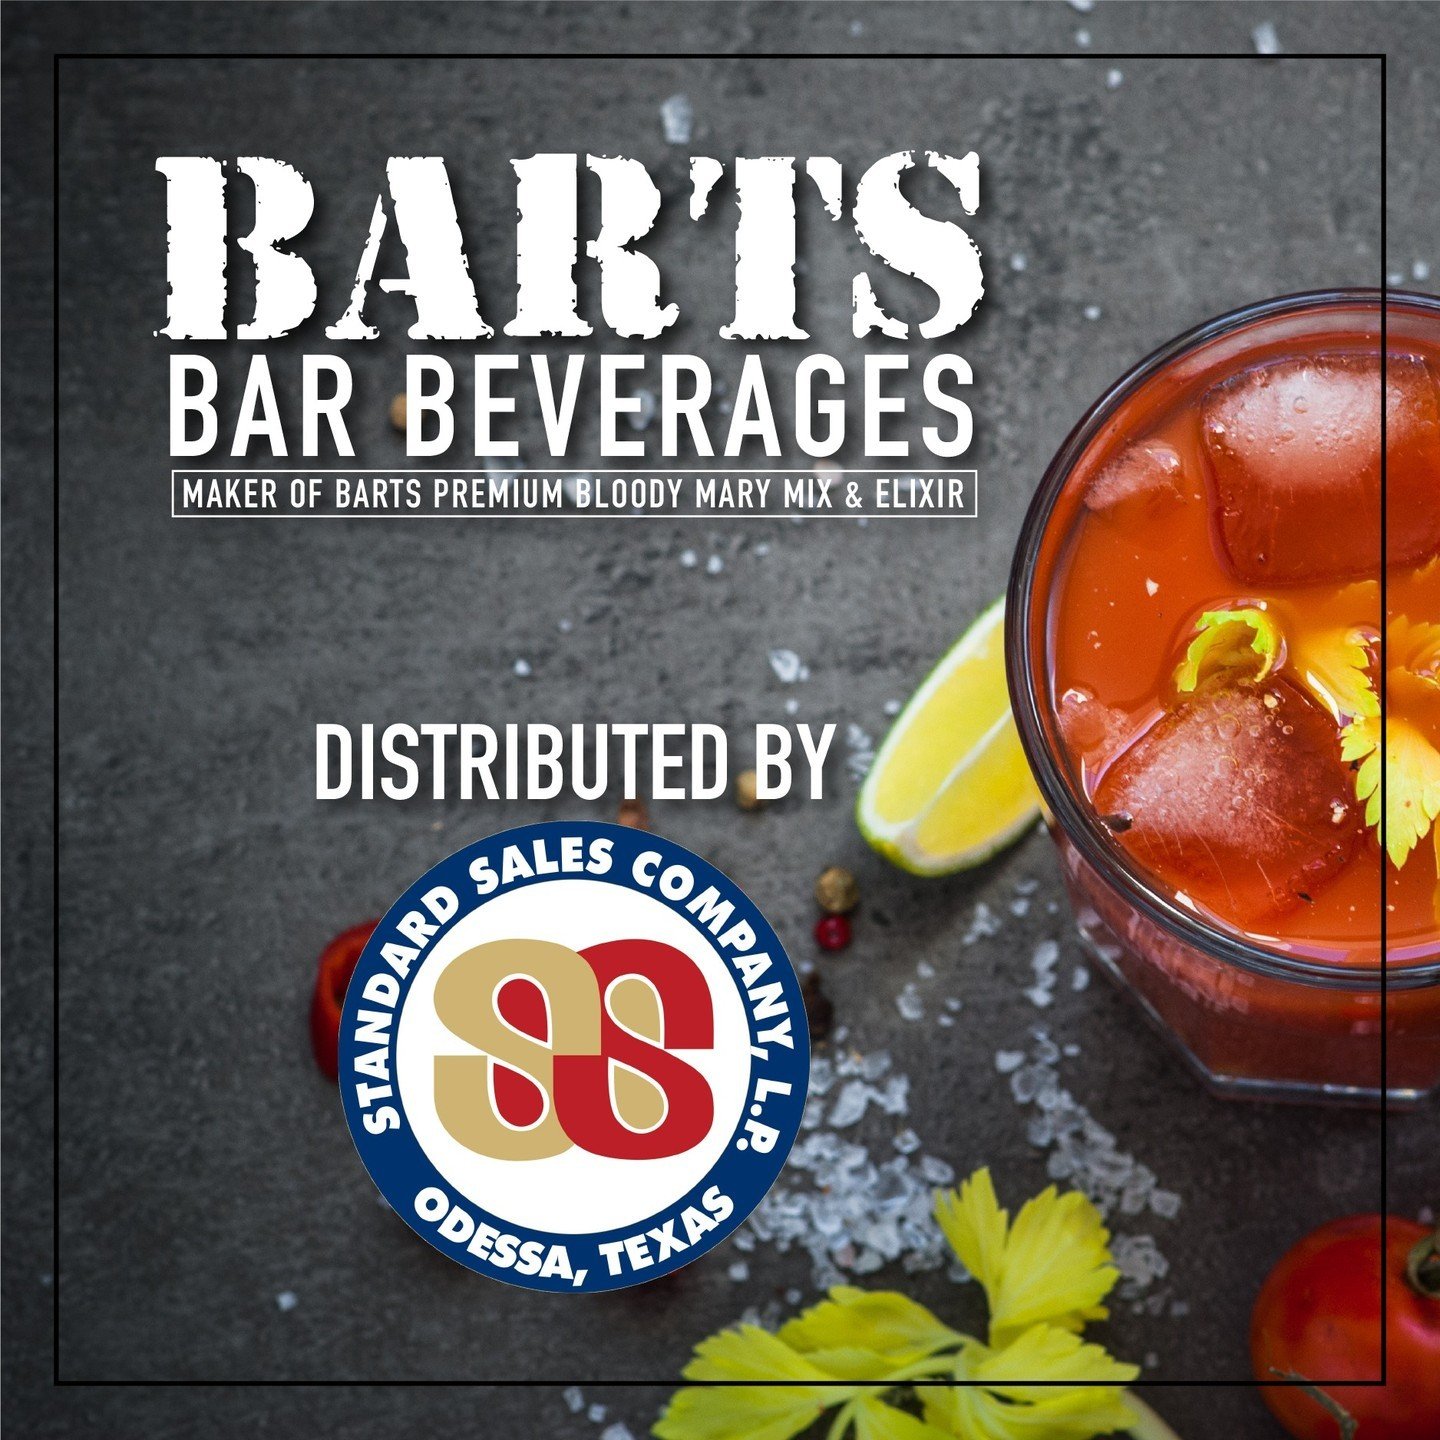 Thank you to our distributor, Standard Sales of Odessa! We are excited to grow our love of Bloody Mary's and other beverages. Cheers, y'all! #bartsbloodymary #betterbebarts #shopsmall #drinklocal #shoplocal #buylocal #shopsmallmidland #midlandtx #mid